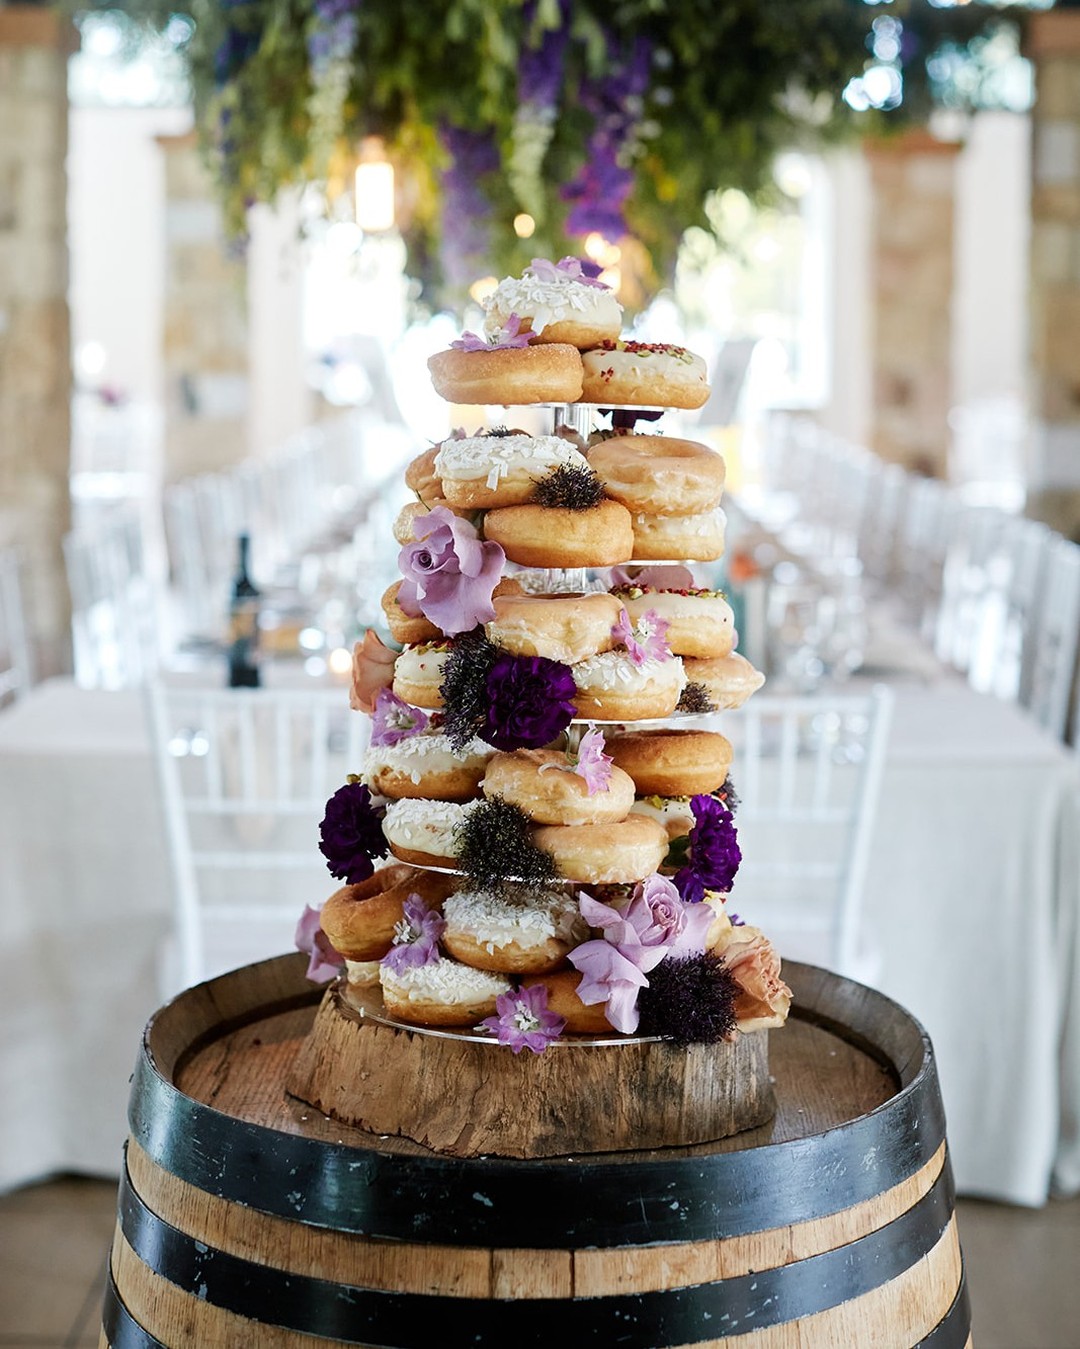 donuts wedding cake with purple flowers via enzohuntervalley